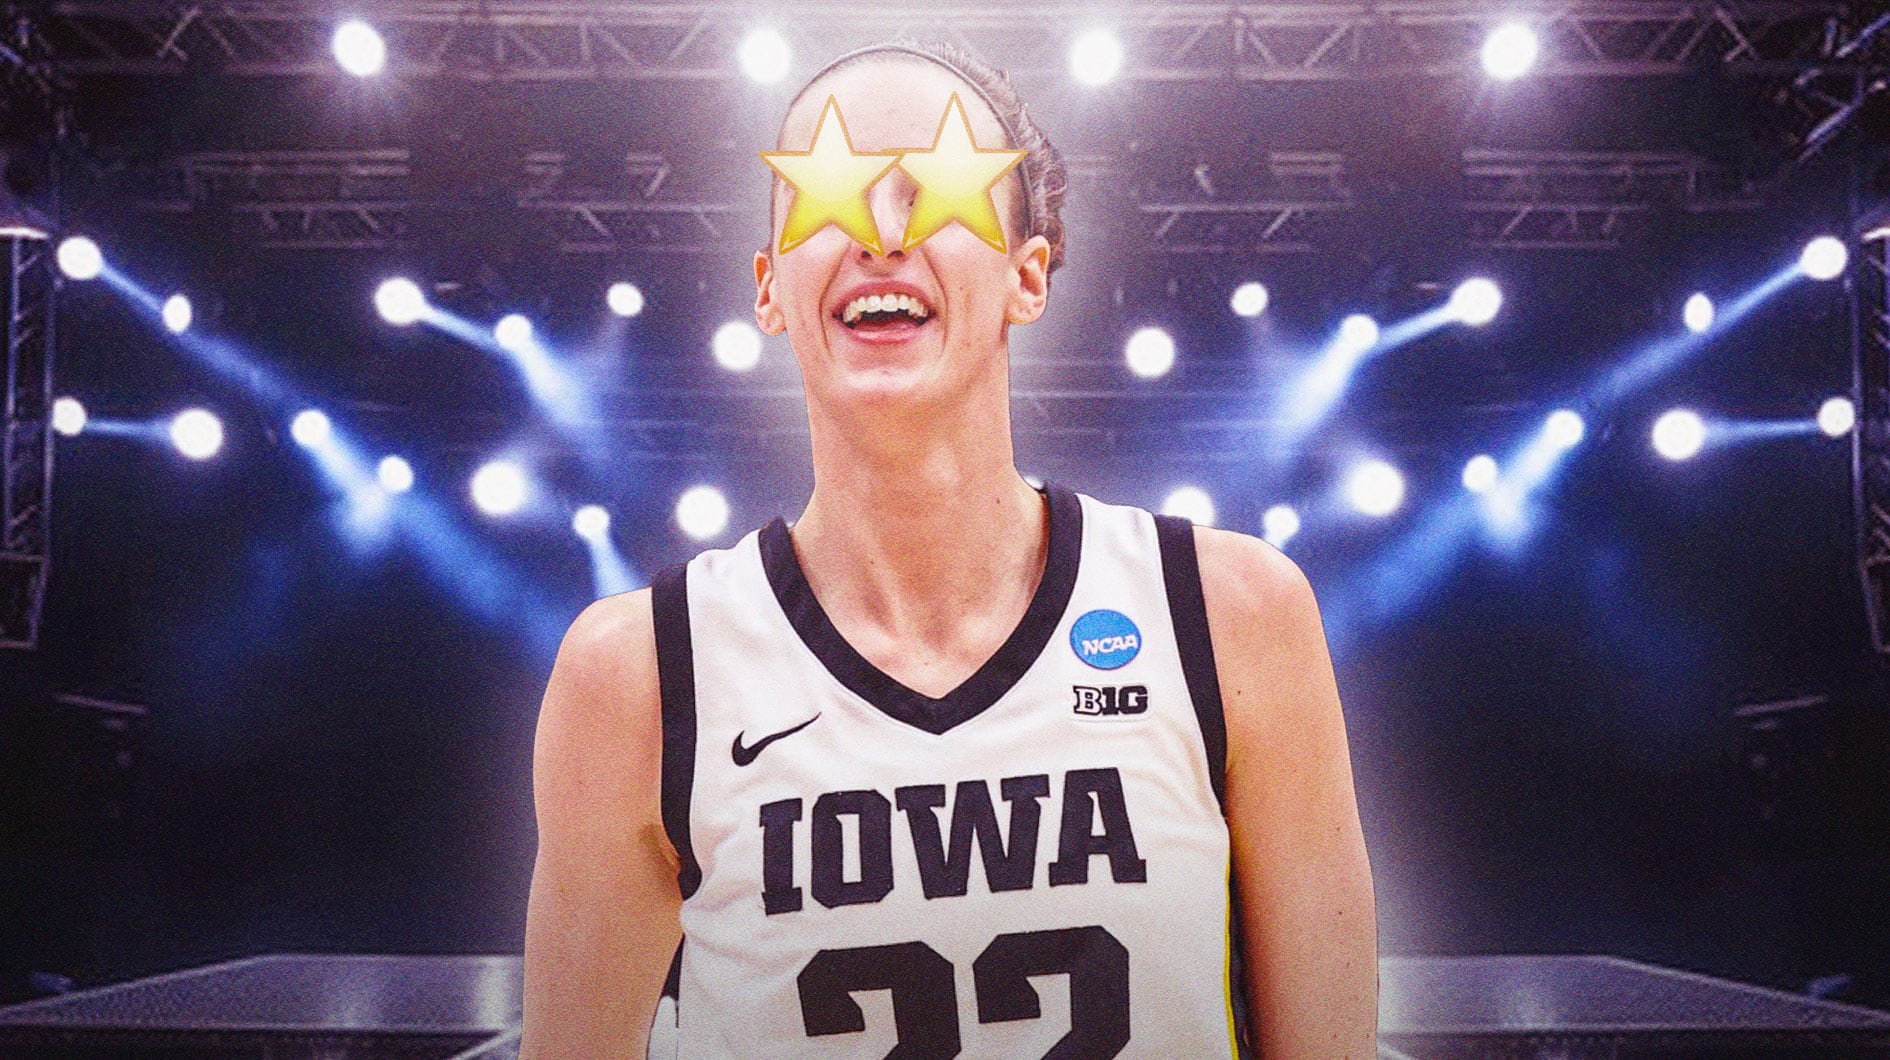 Iowa women's basketball Caitlin Clark in her Iowa uniform with stars in her eyes, on a stage with a spotlight on her